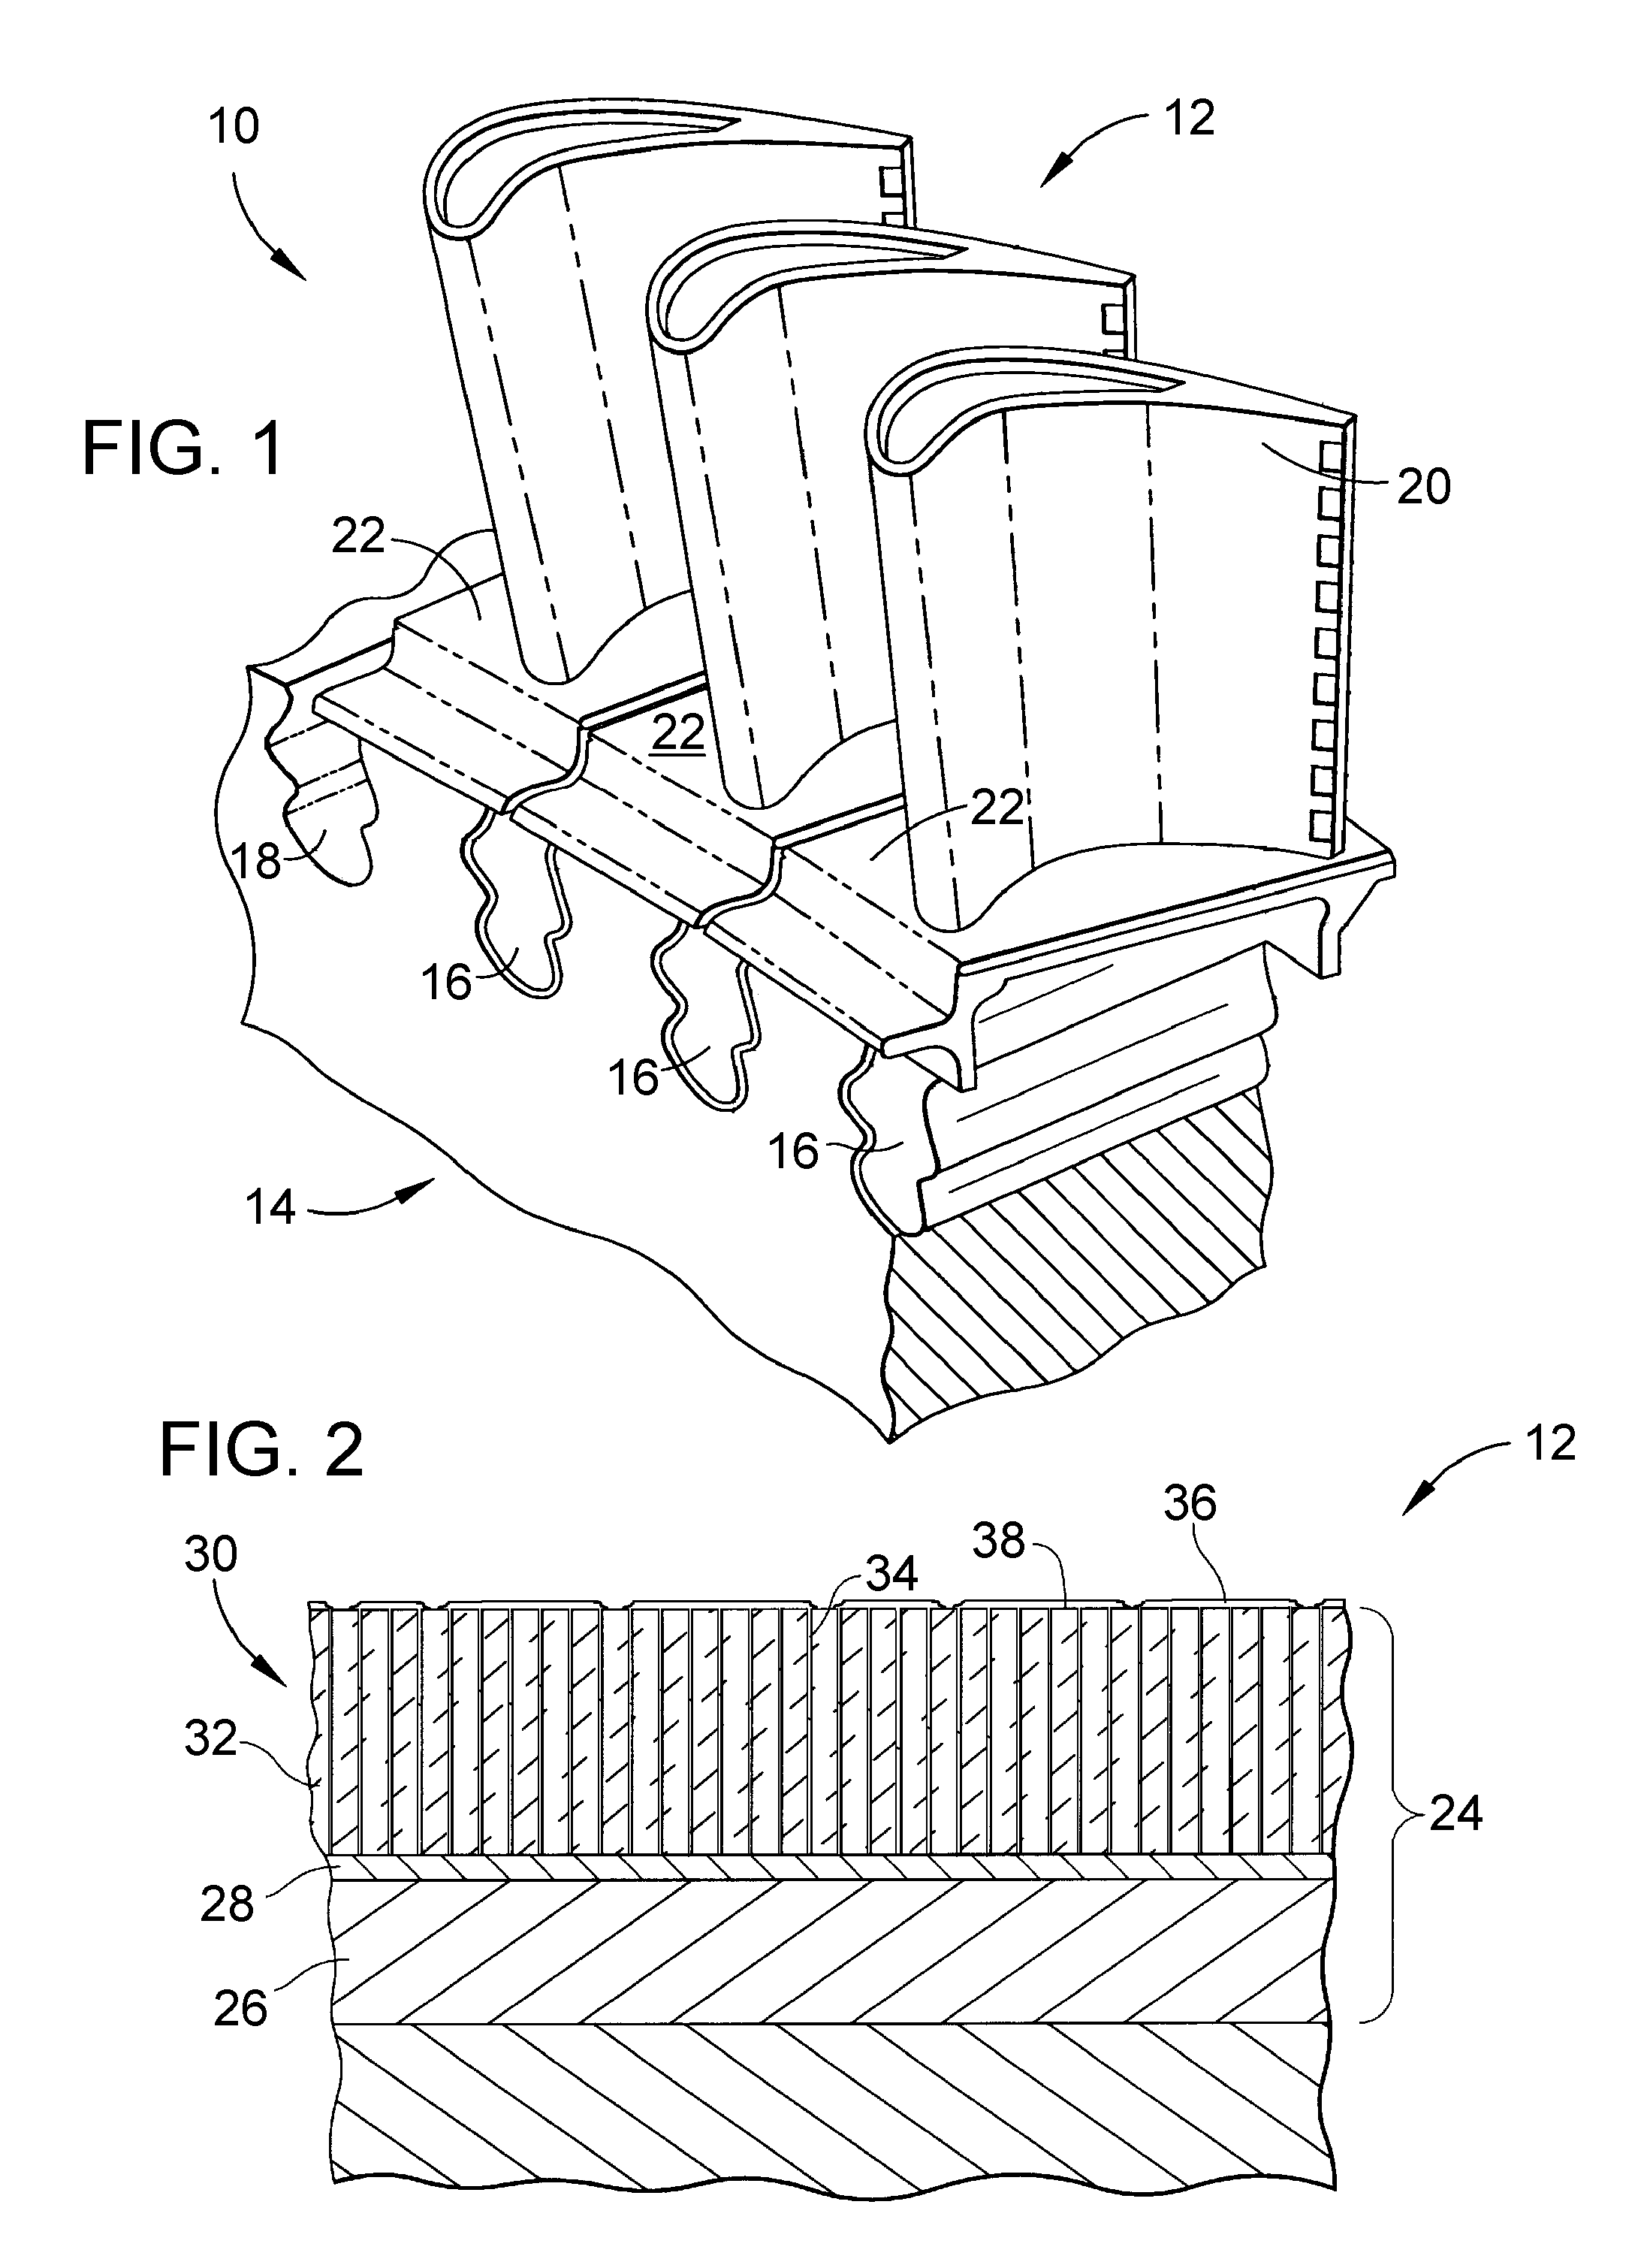 System and method for detecting and analyzing compositions